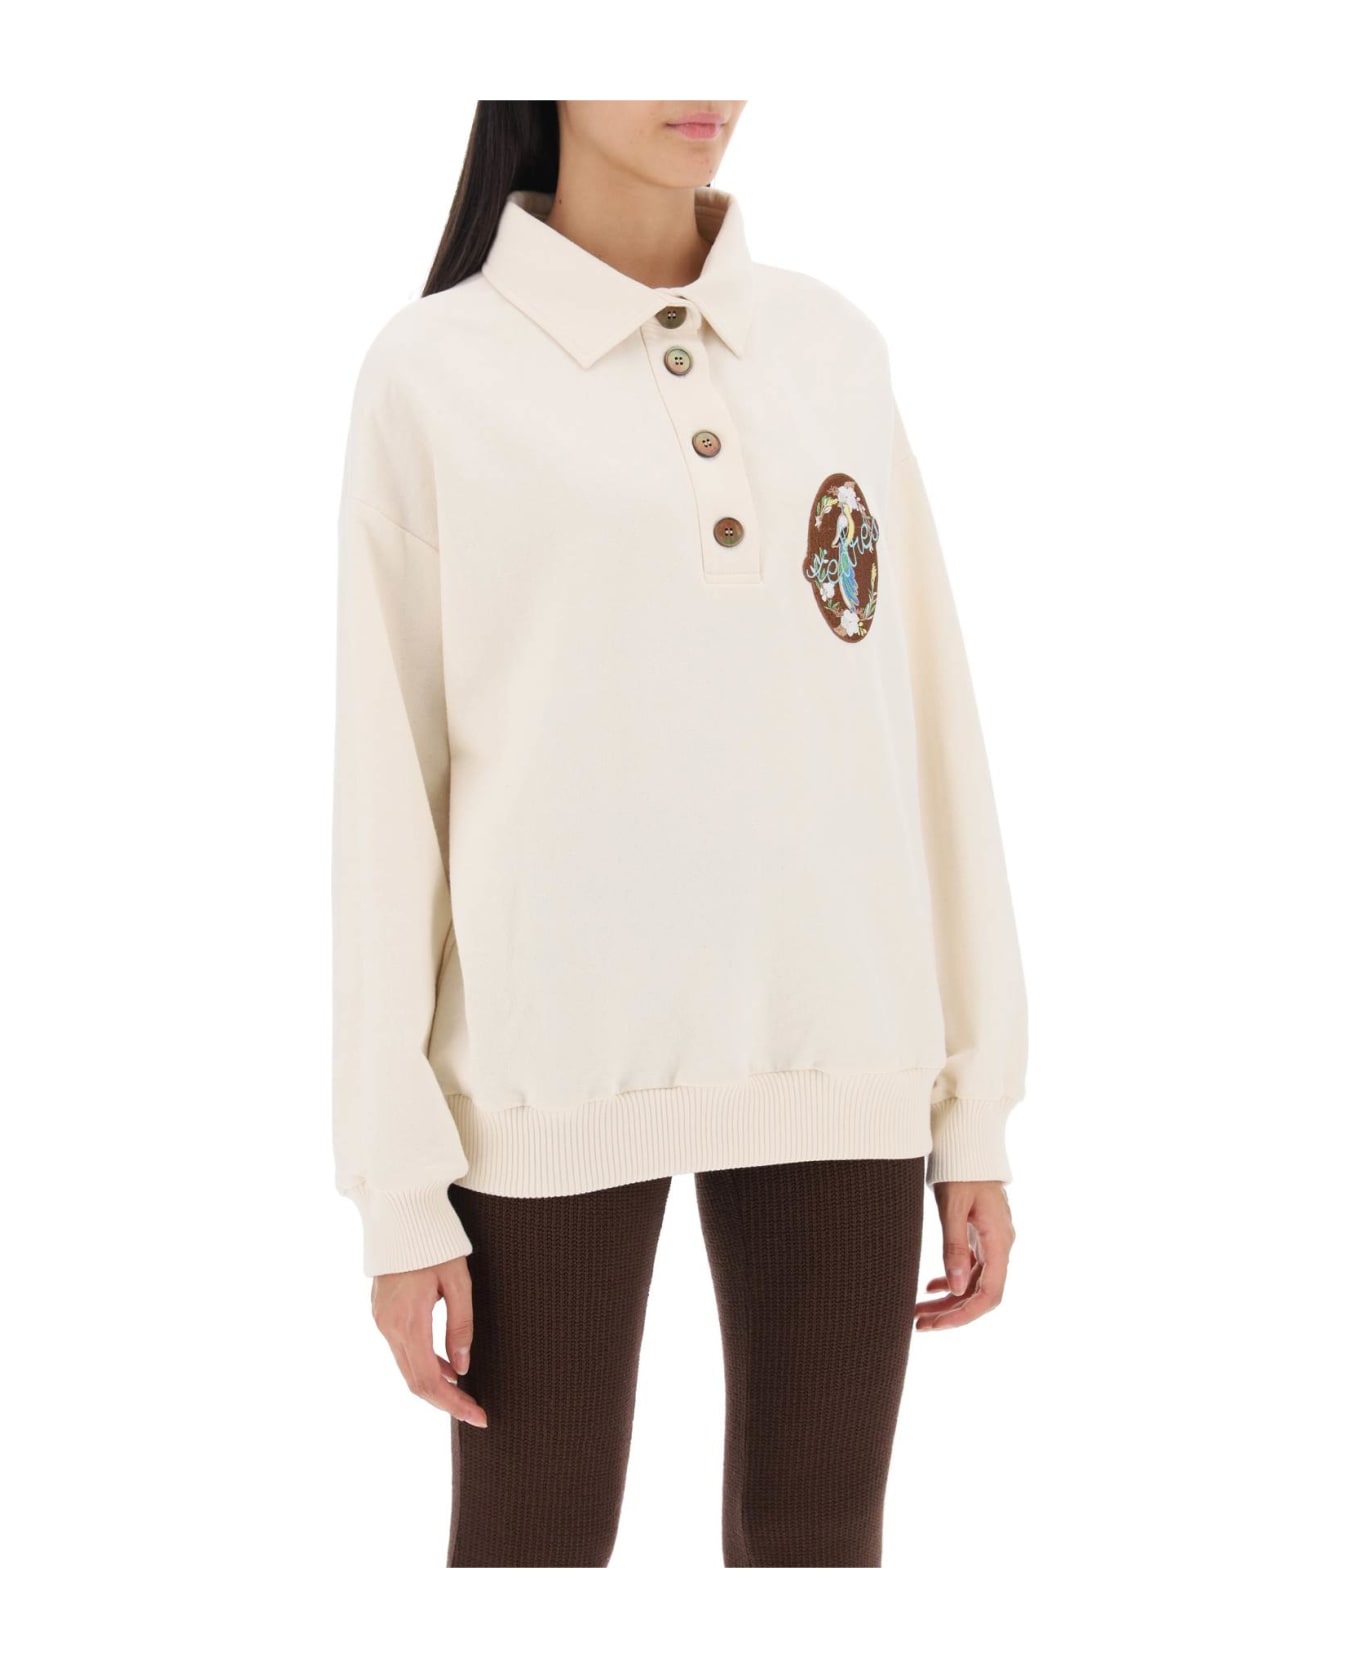 SIEDRES Tany Sweatshirt With Embroidered Patch - ECRU (White)